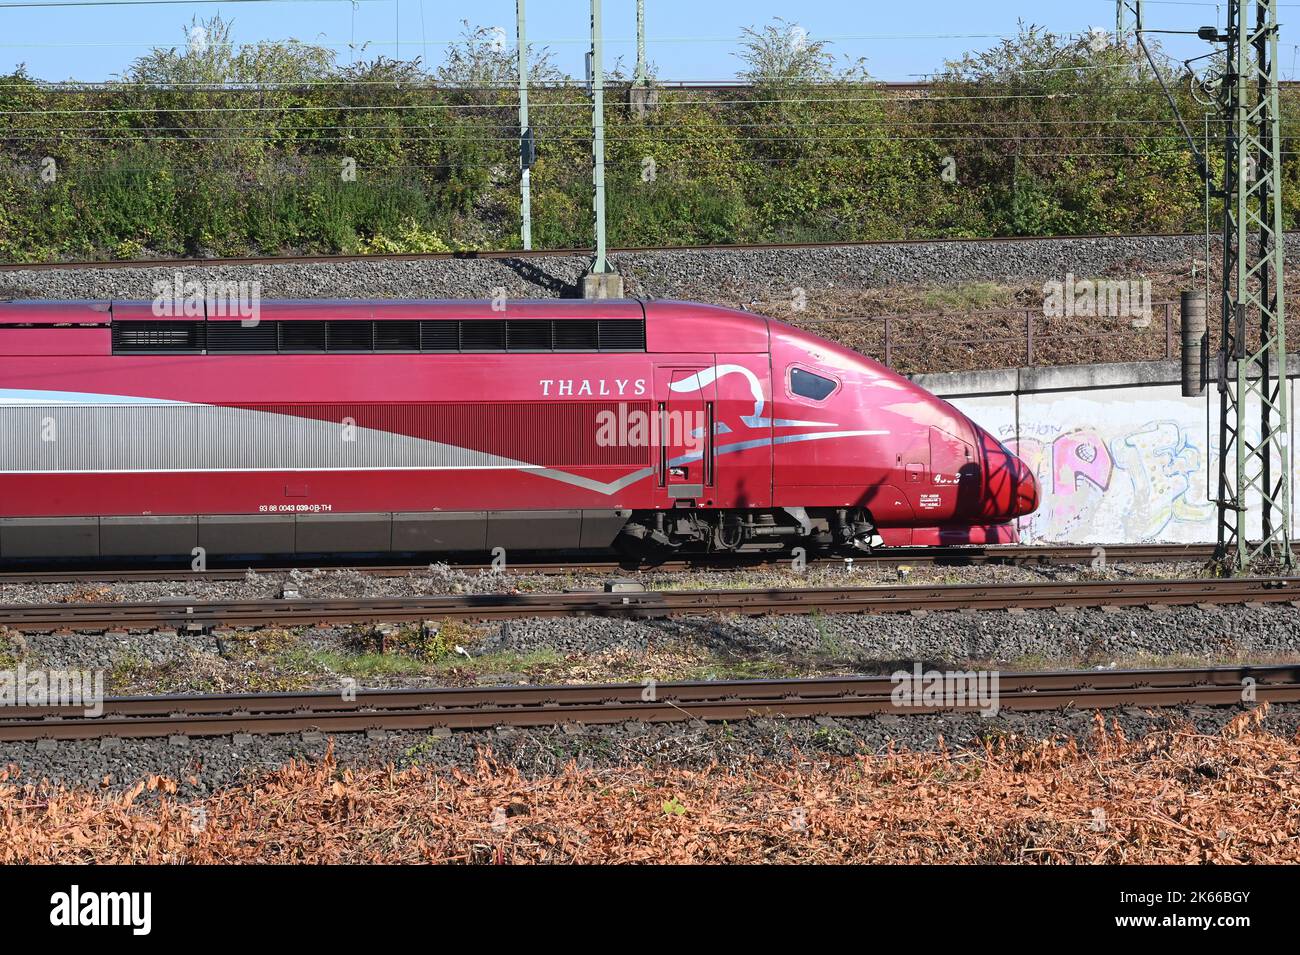 Cologne, Germany. 30th Sep, 2022. Logo, lettering on a railcar of the Thalys,  a European high-speed train based on the technology of the French TGV  Reseau Credit: Horst Galuschka/dpa/Horst Galuschka dpa/Alamy Live